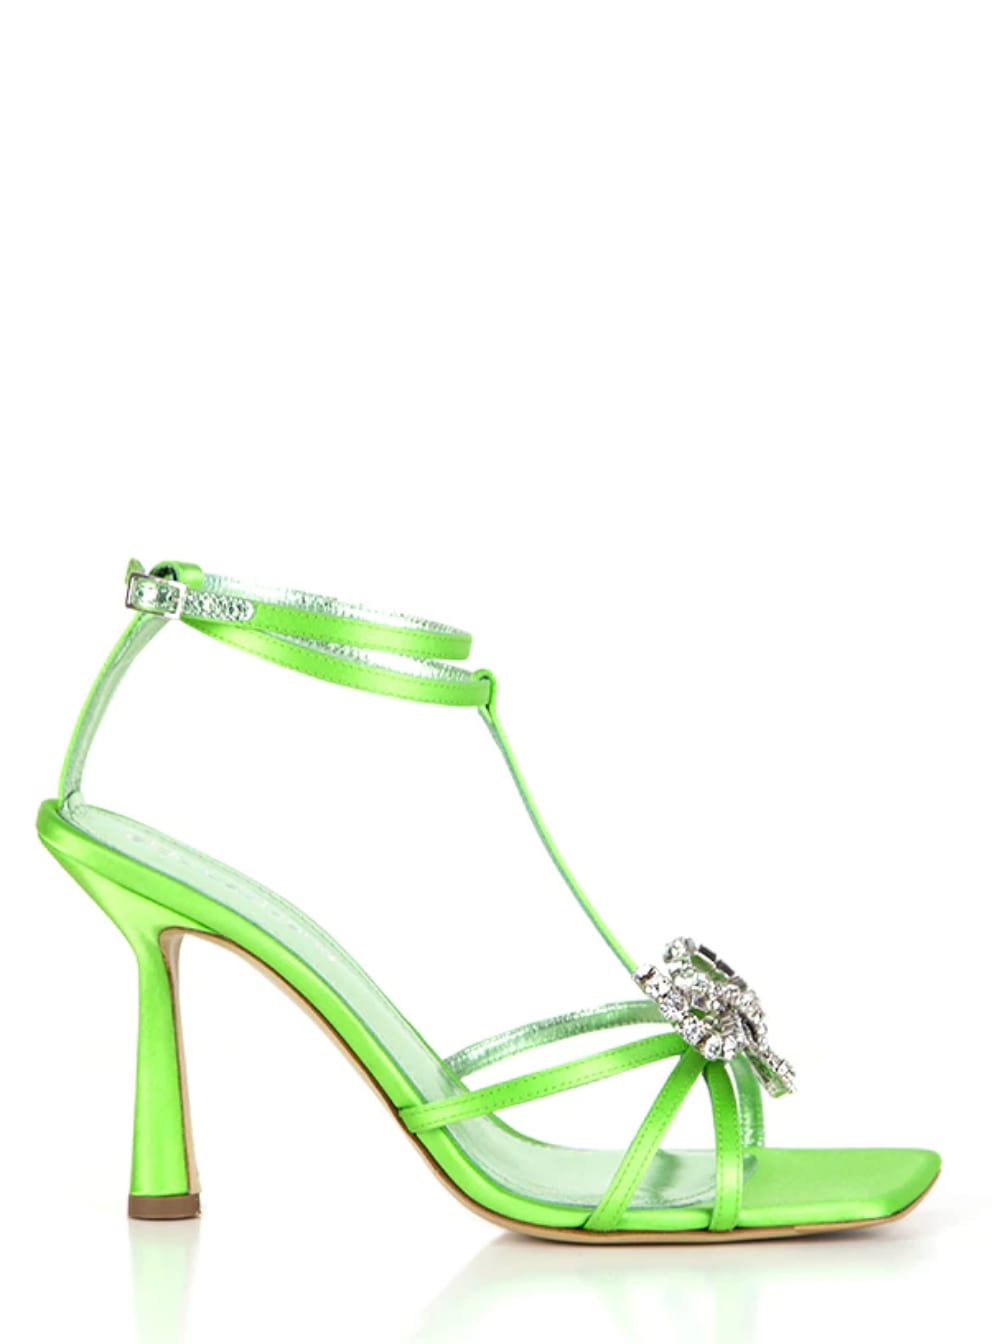 Aldo Castagna Womans Green Leather And Satinr Jewel Sandals